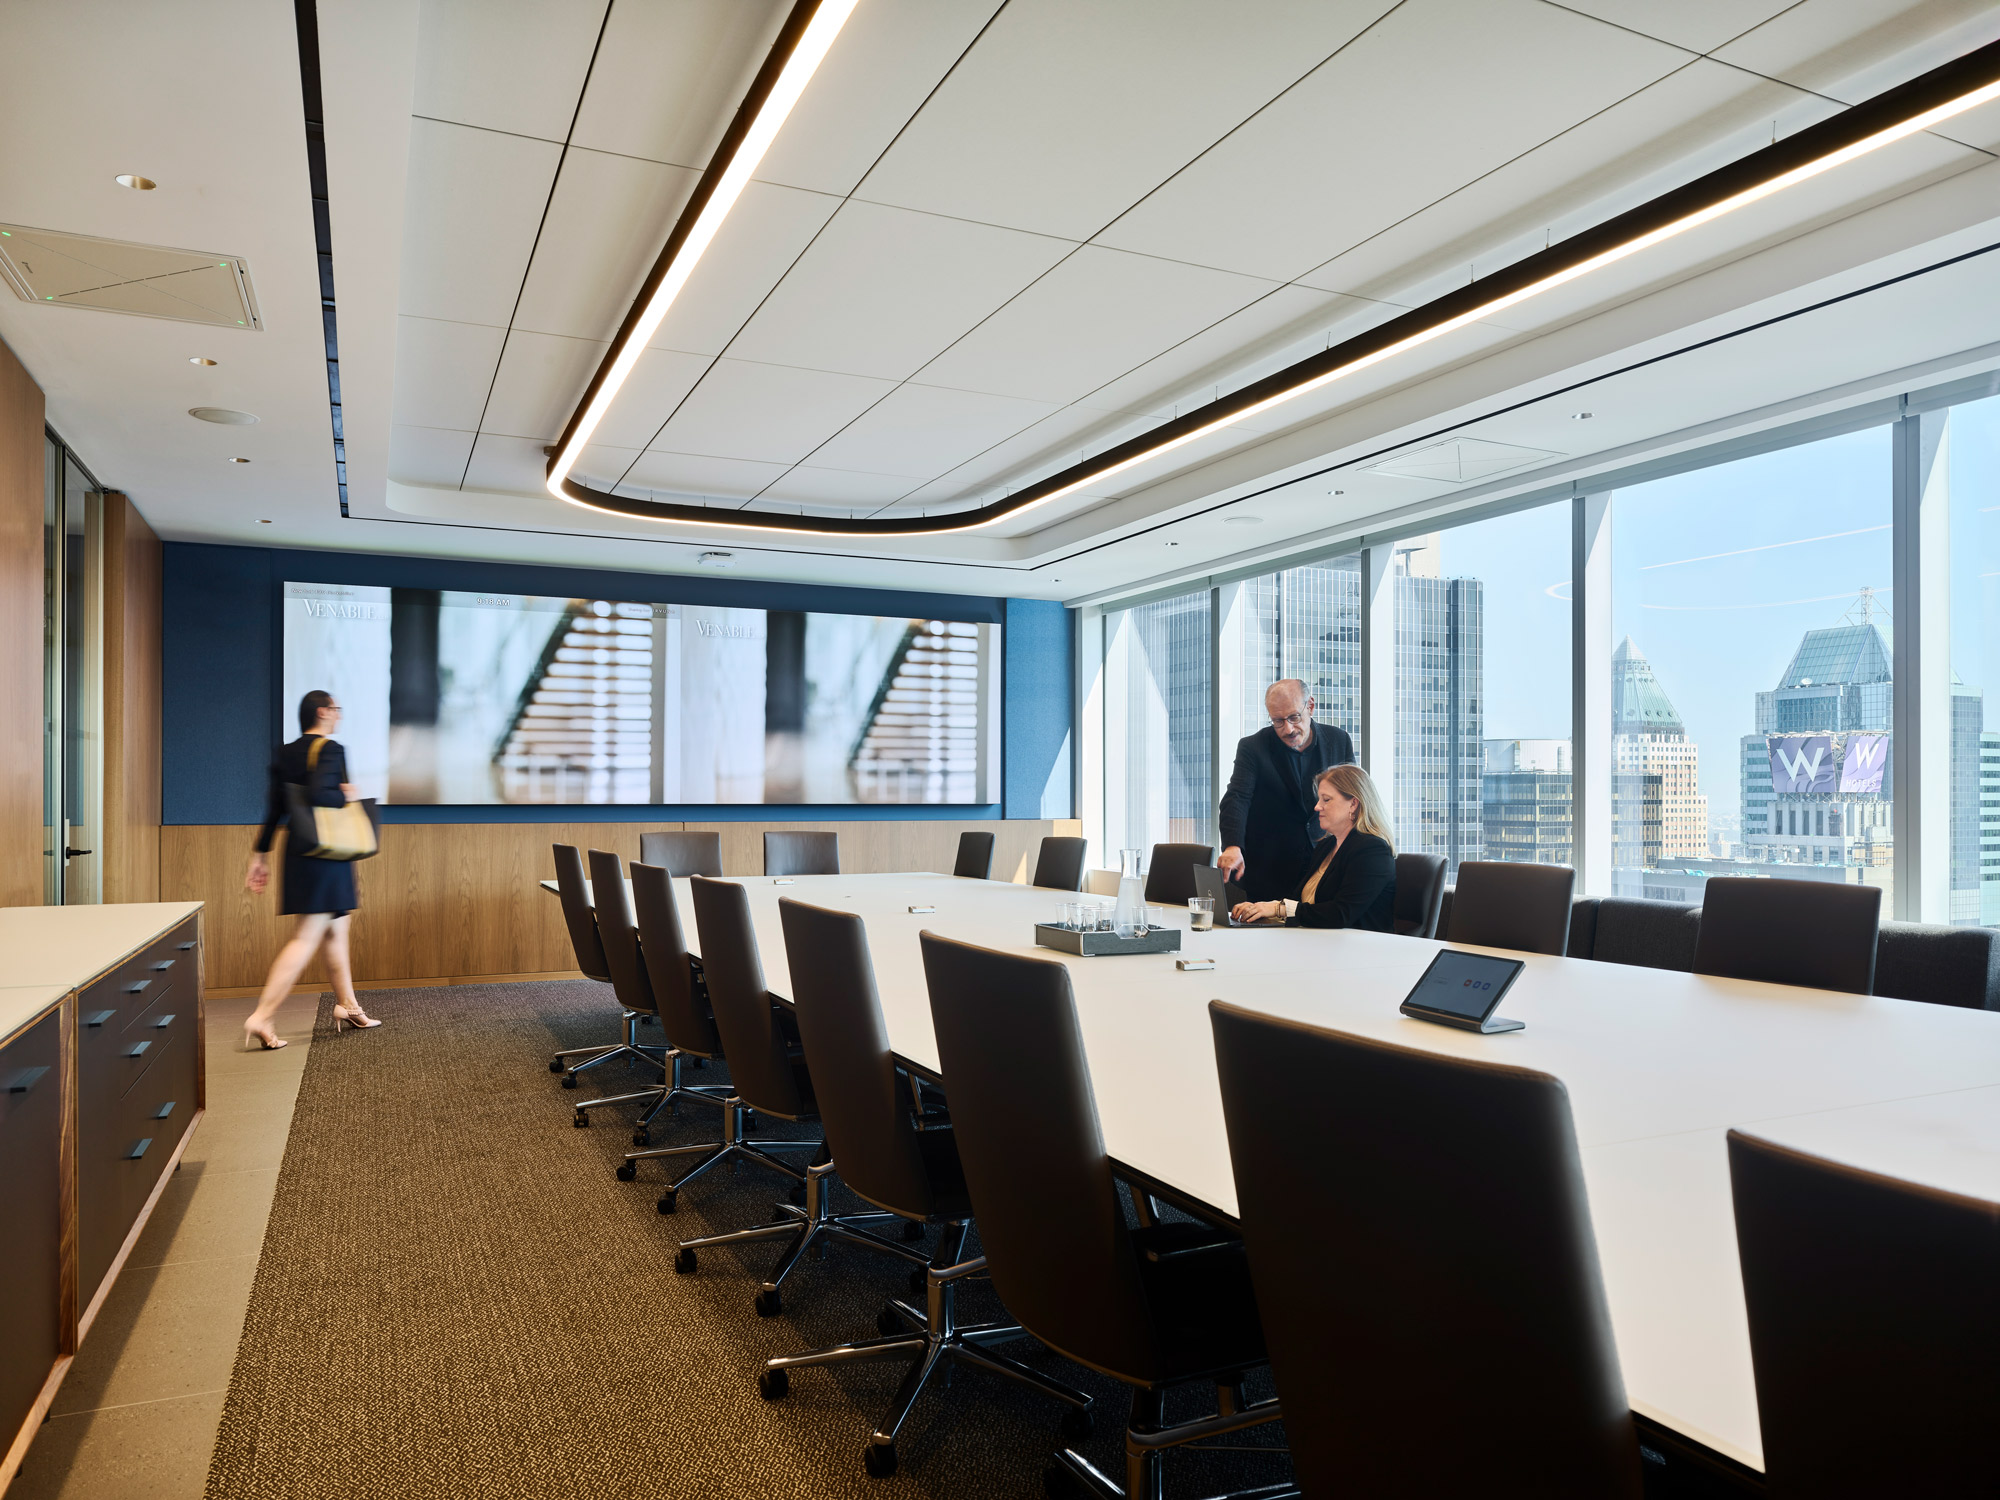 A boardroom with a large conference table, overhead linear lighting, and floor-to-ceiling windows showcasing city views.